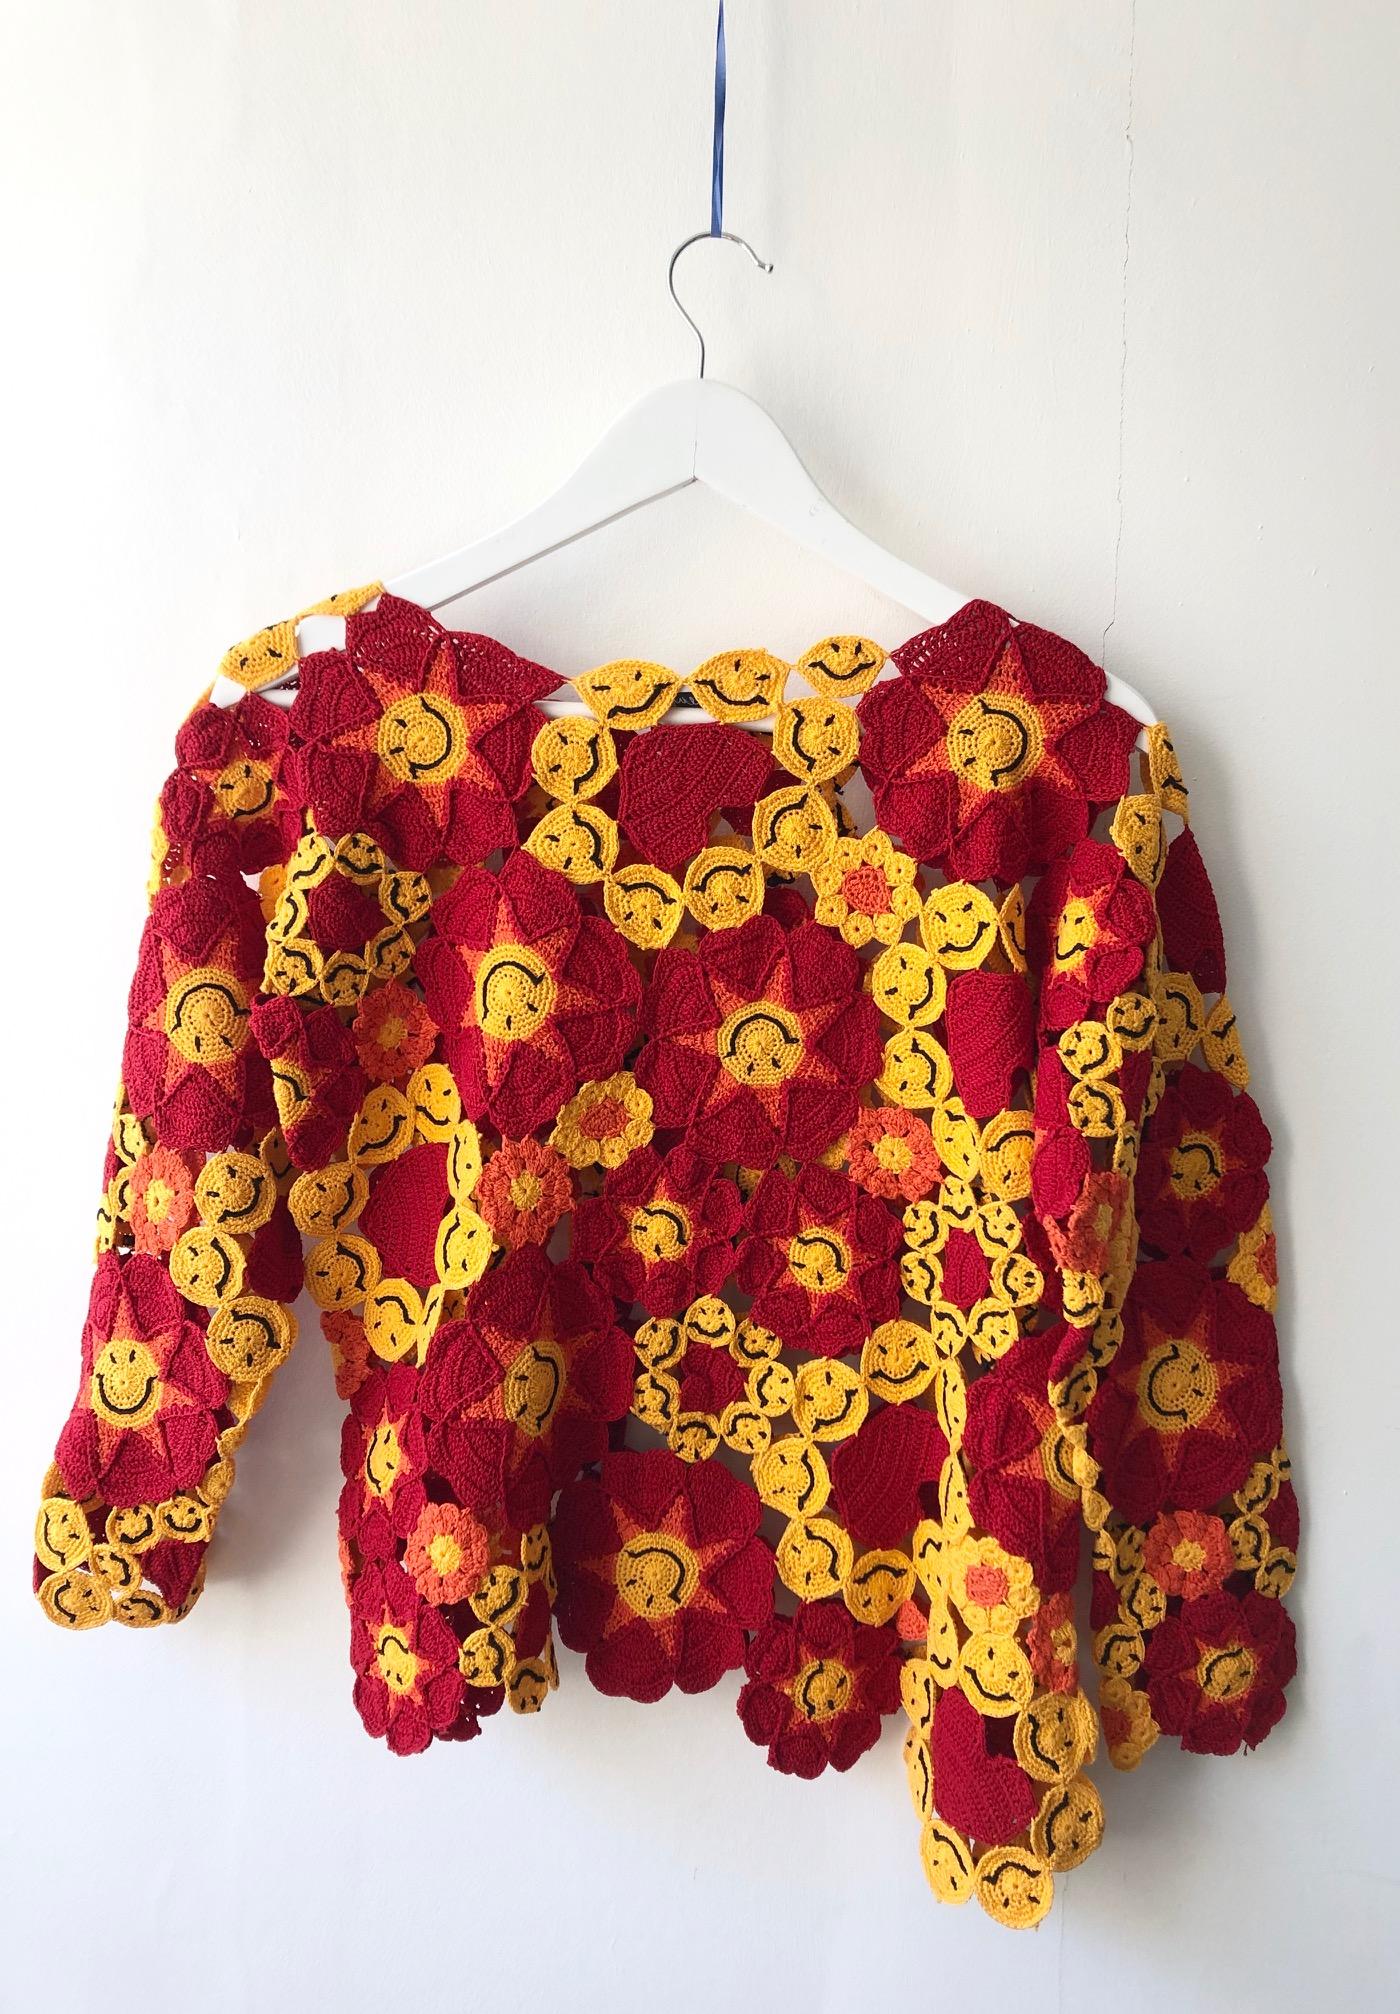 Authentic Moschino Vintage Crochet Smiley face sweater, asymmetrical hemline, classic fit, red, orange and red floral and happy face pattern, long sleeves, round neck, cotton 
Condition: vintage. excellent, 1990s
Size S-M
Measures: 18.5 inches from